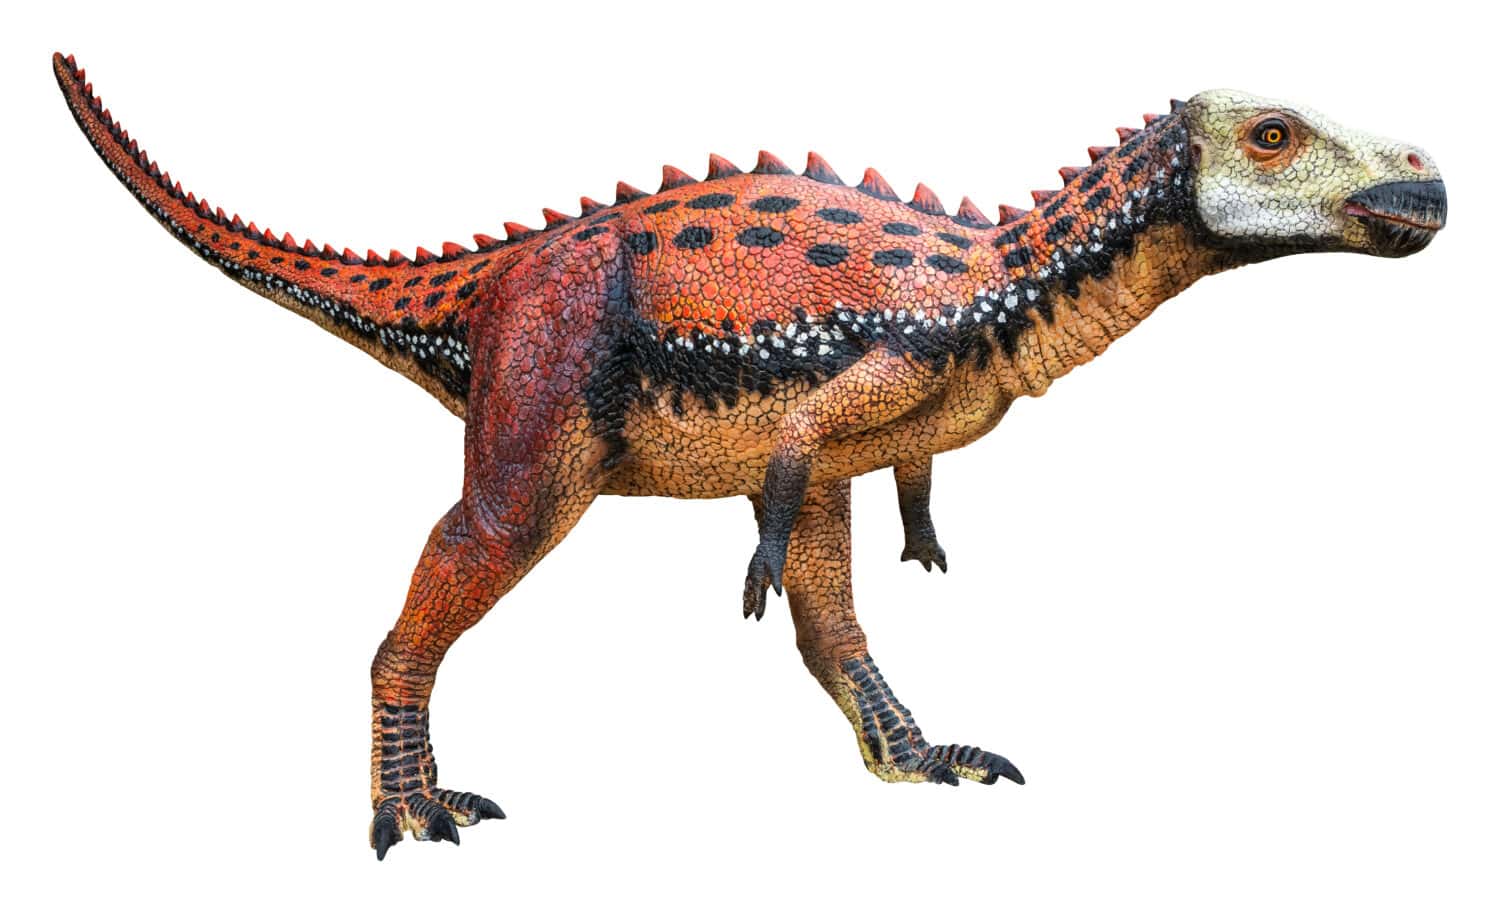 Zalmoxes is an extinct herbivore genus of Rhabdodontid Ornithopod dinosaur from the Late Cretaceous, Zalmoxes isolated on white background with a clipping path